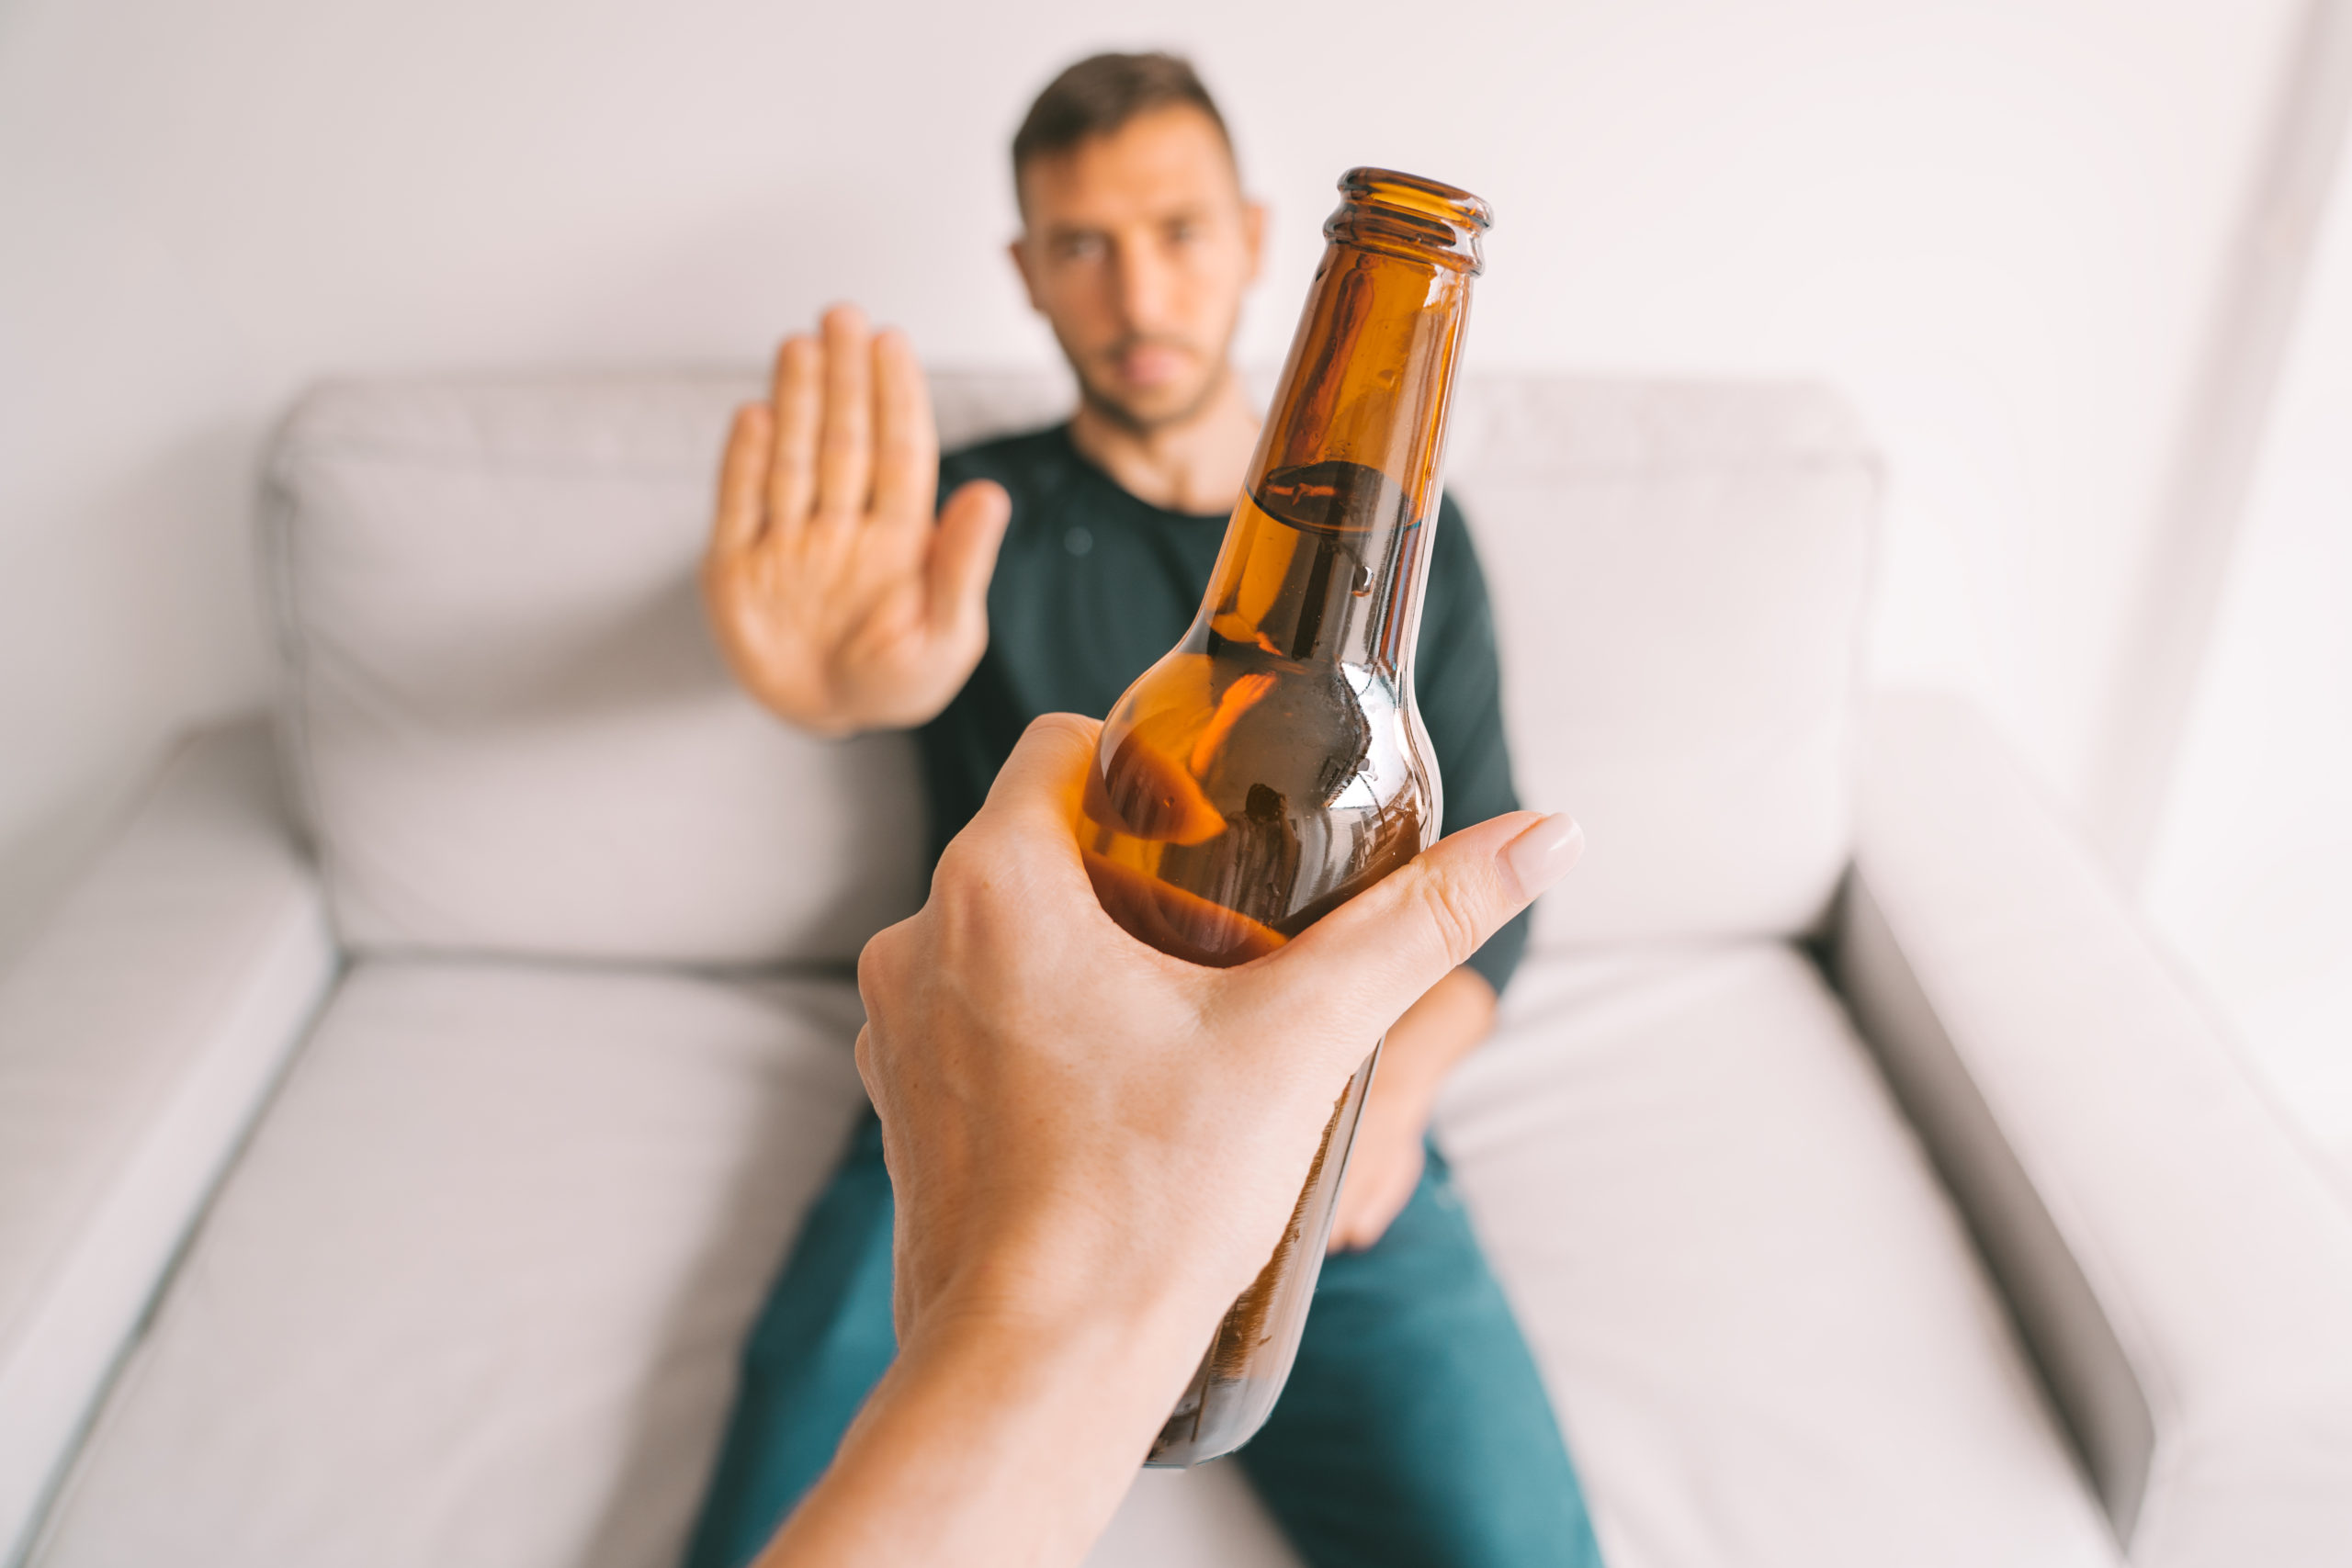 The Signs of Alcohol Addiction to Look Out For